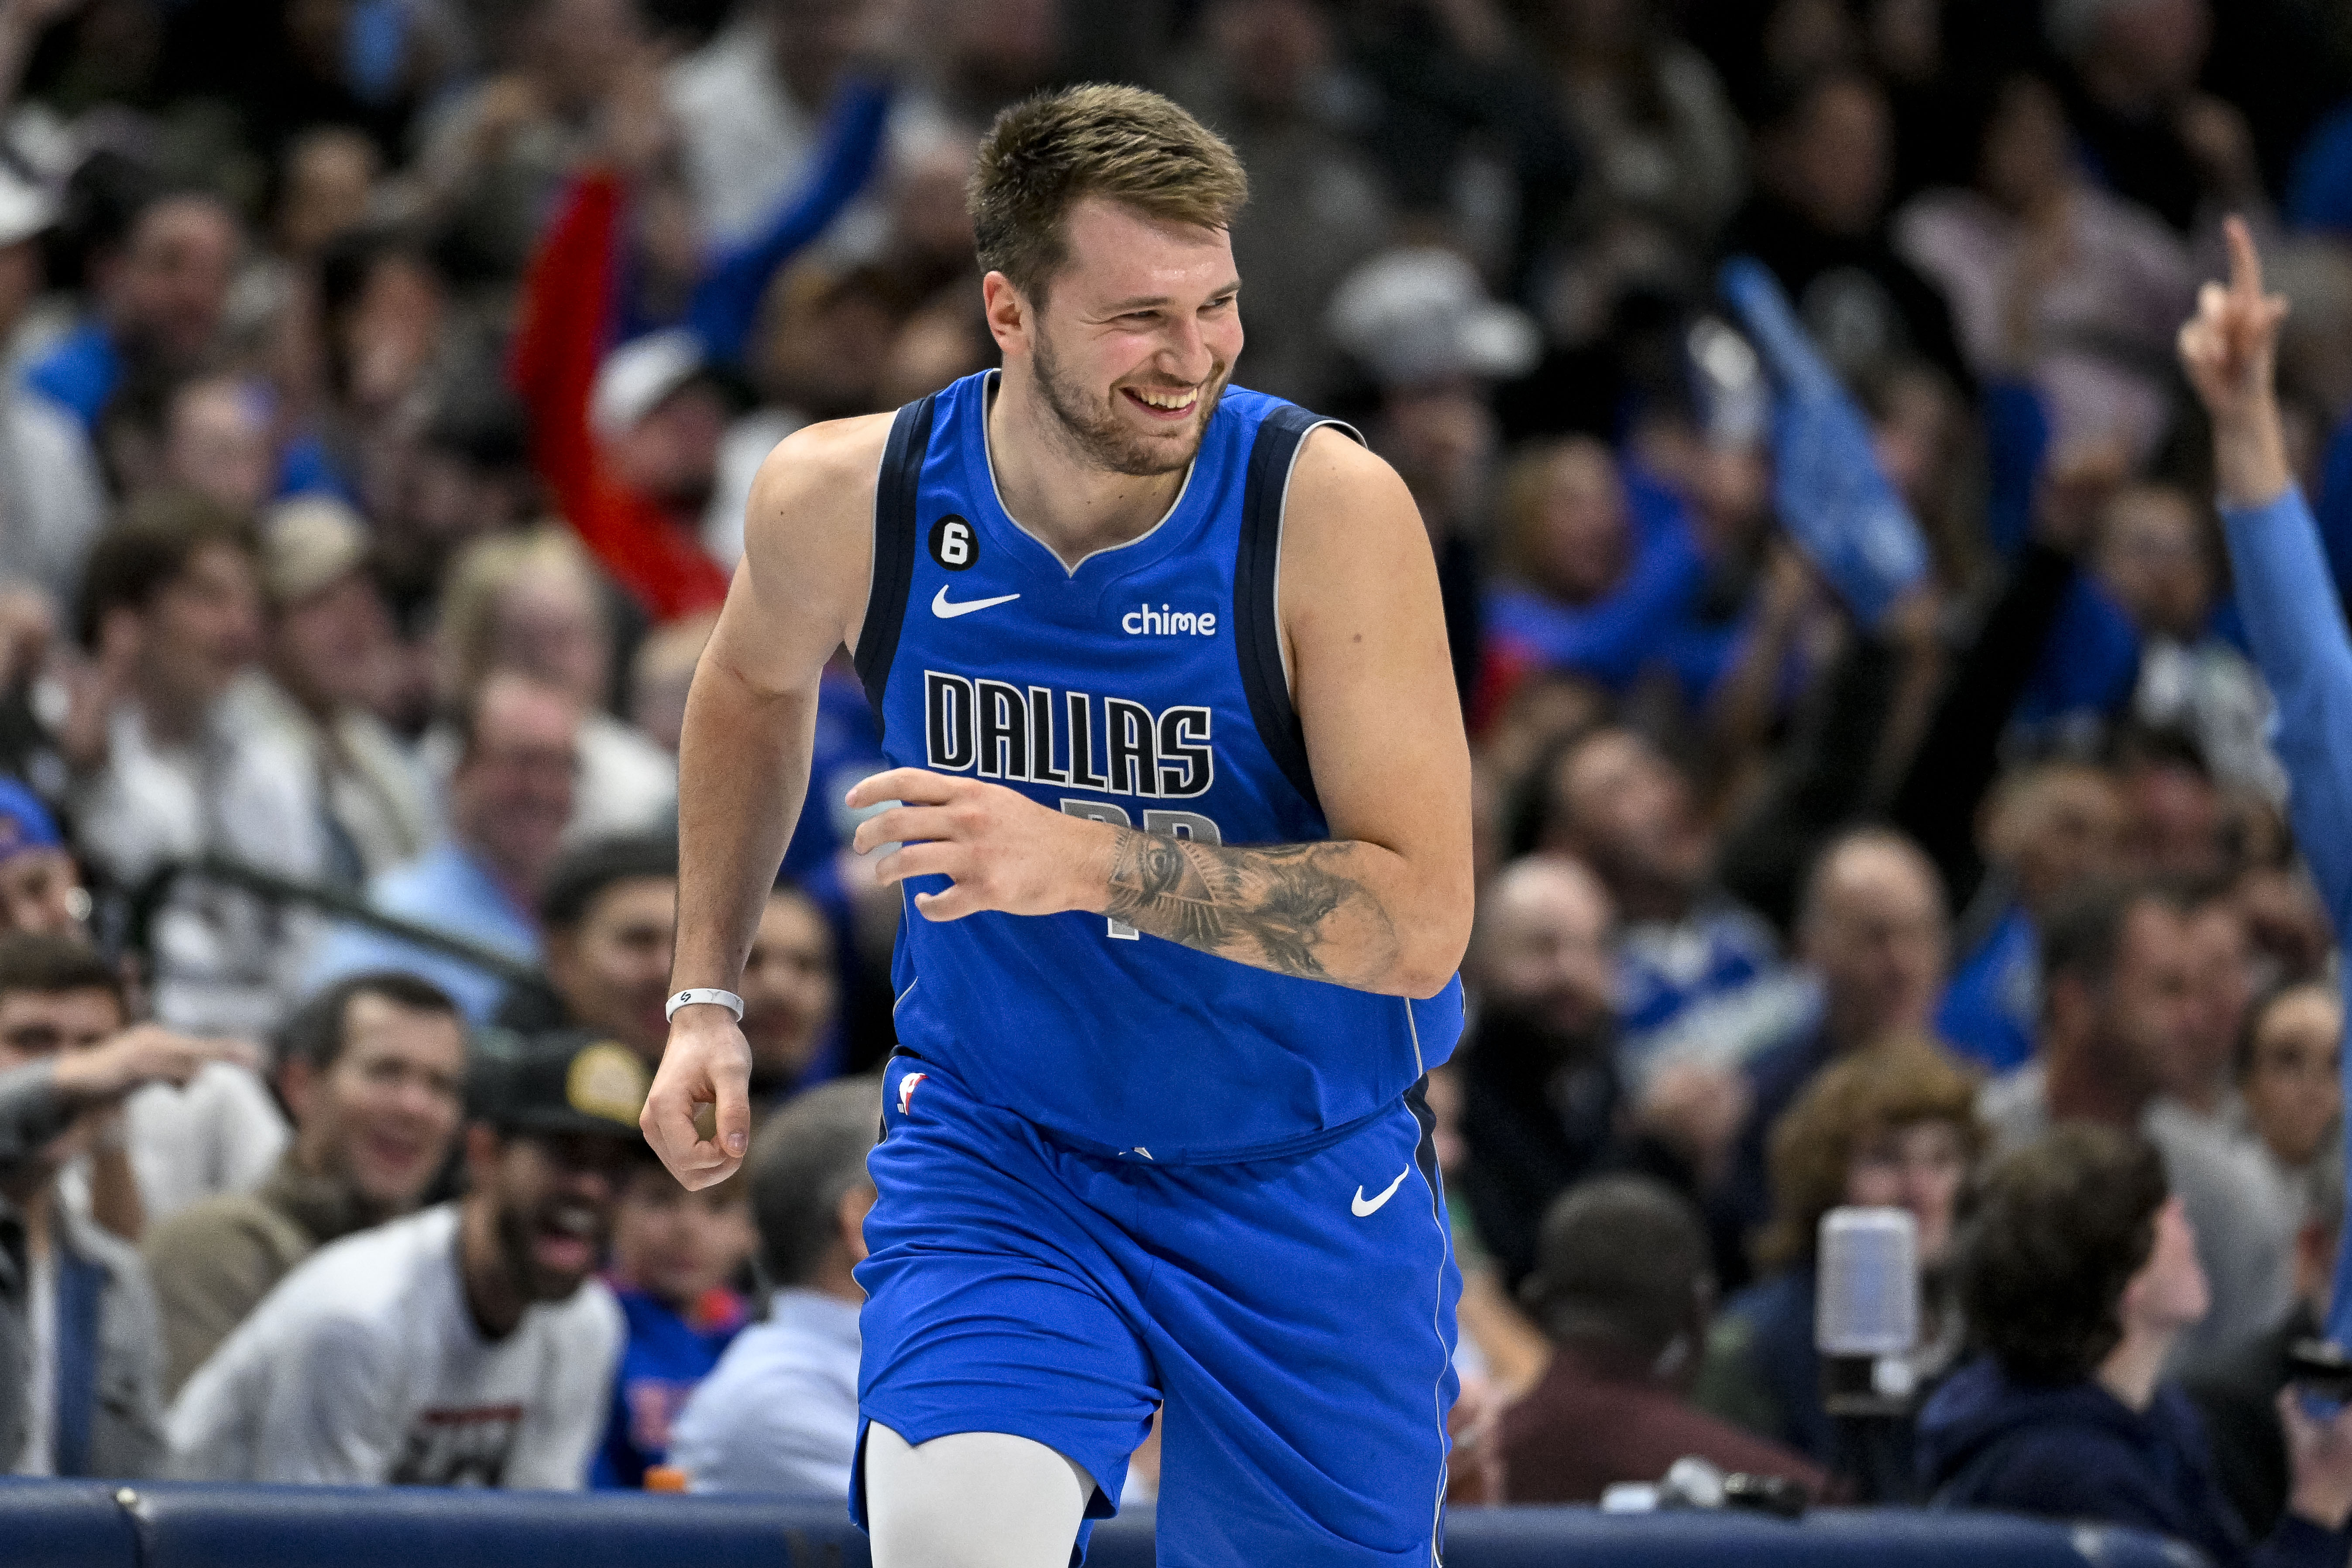 ‘Basketball Is My Peace Place’: Luka Doncic on Enjoying the Game He Loves